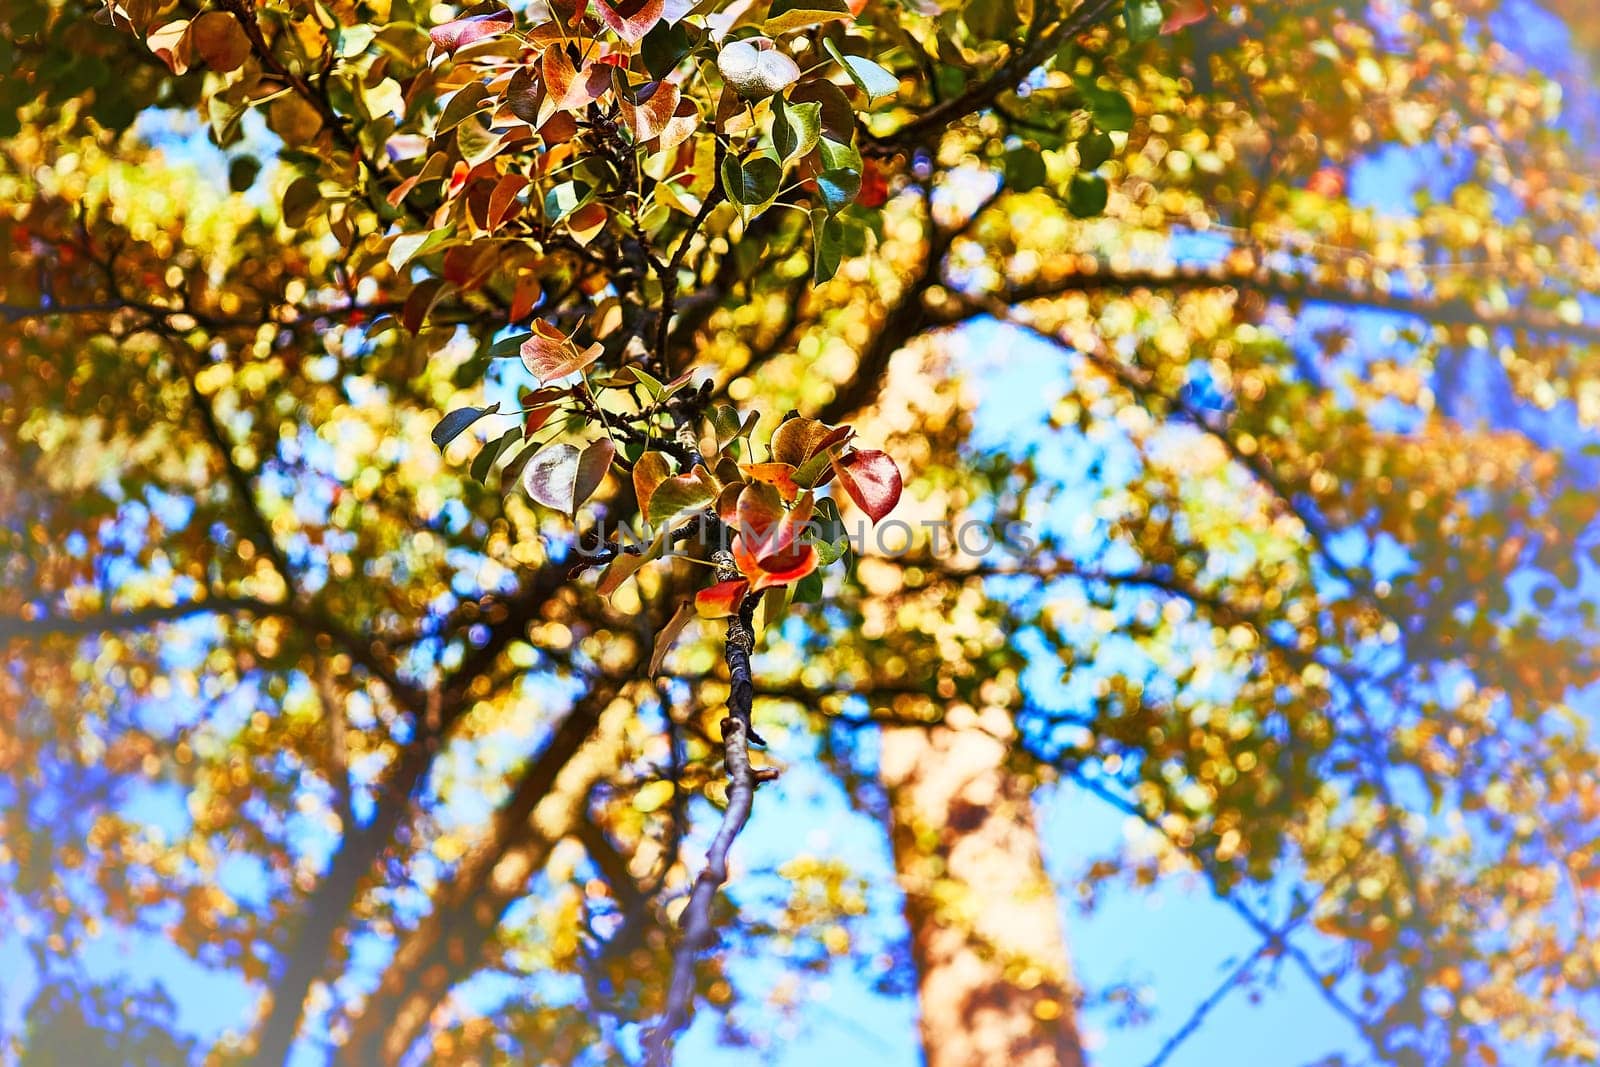 Autumn bright orange pear leaves close up in sunny day and blue sky by jovani68